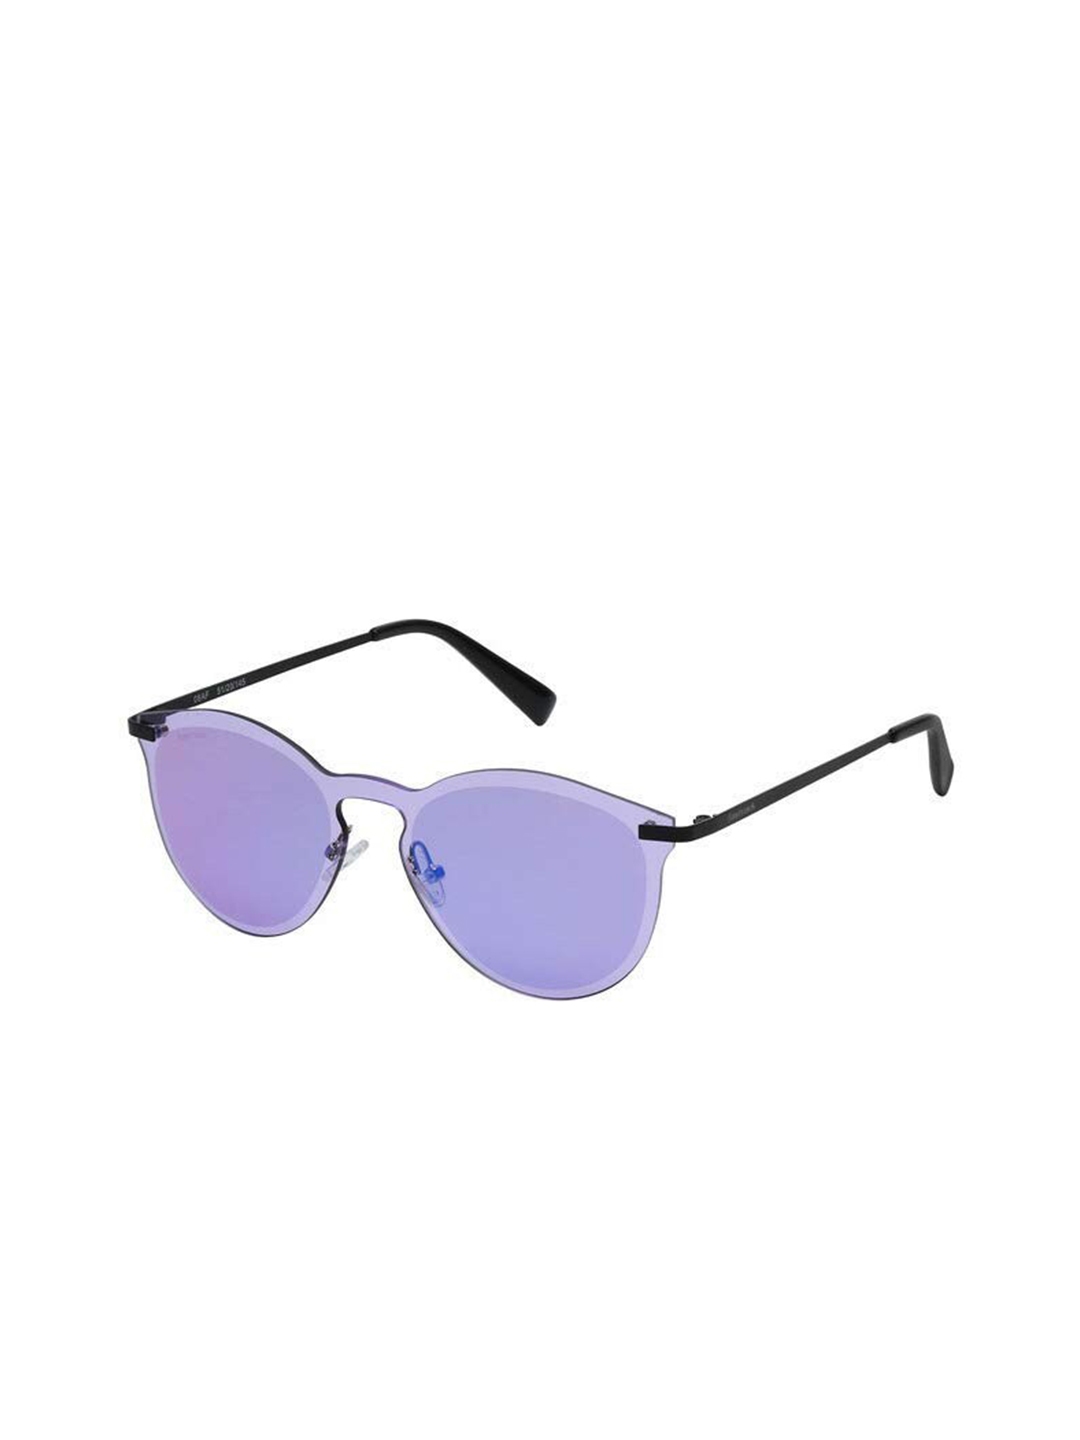 Buy Fastrack Unisex Purple Lens And Purple Round Sunglasses With Uv Protected Lens Sunglasses